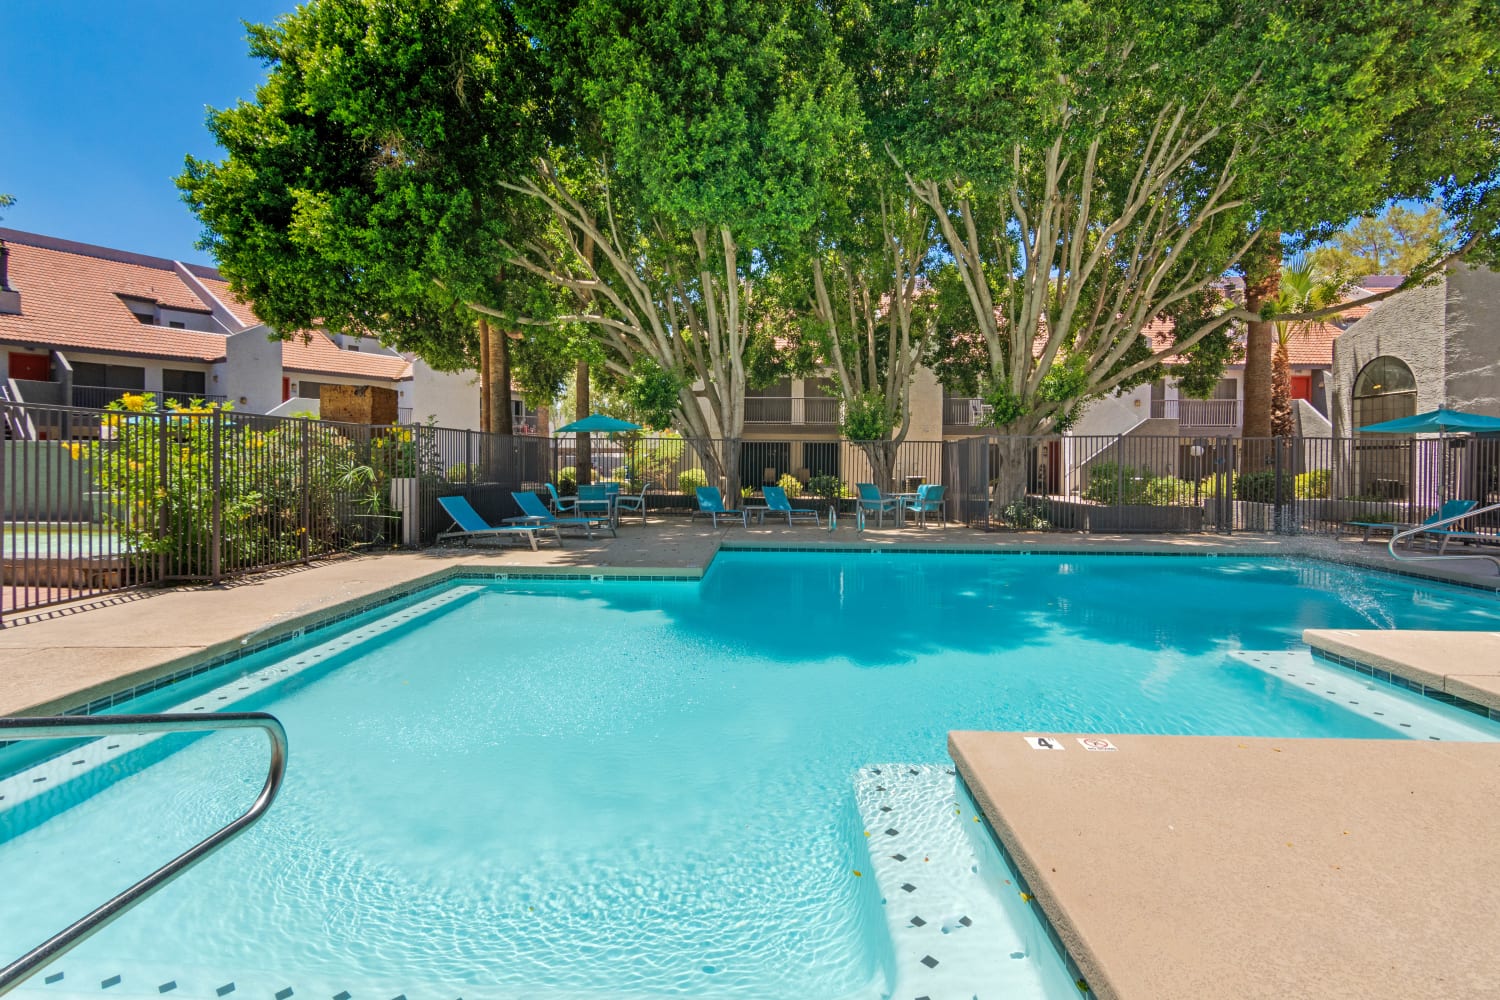 Community outdoor pool at Waterford Place Apartments in Mesa, Arizona